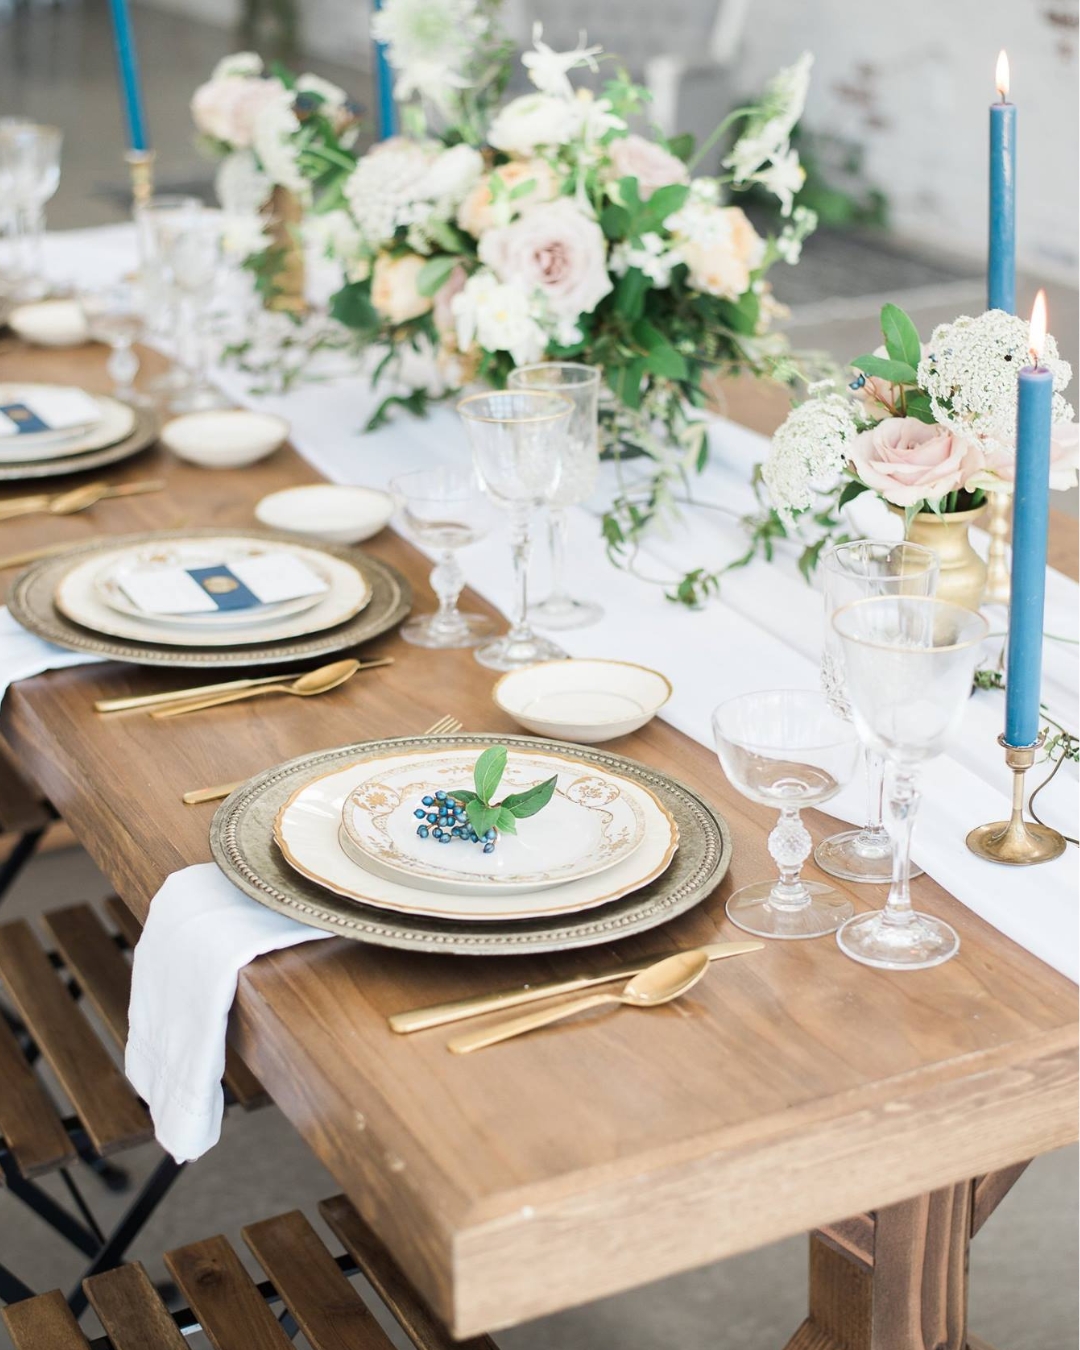 wooden table with gold and white table settings and white floral centerpiece